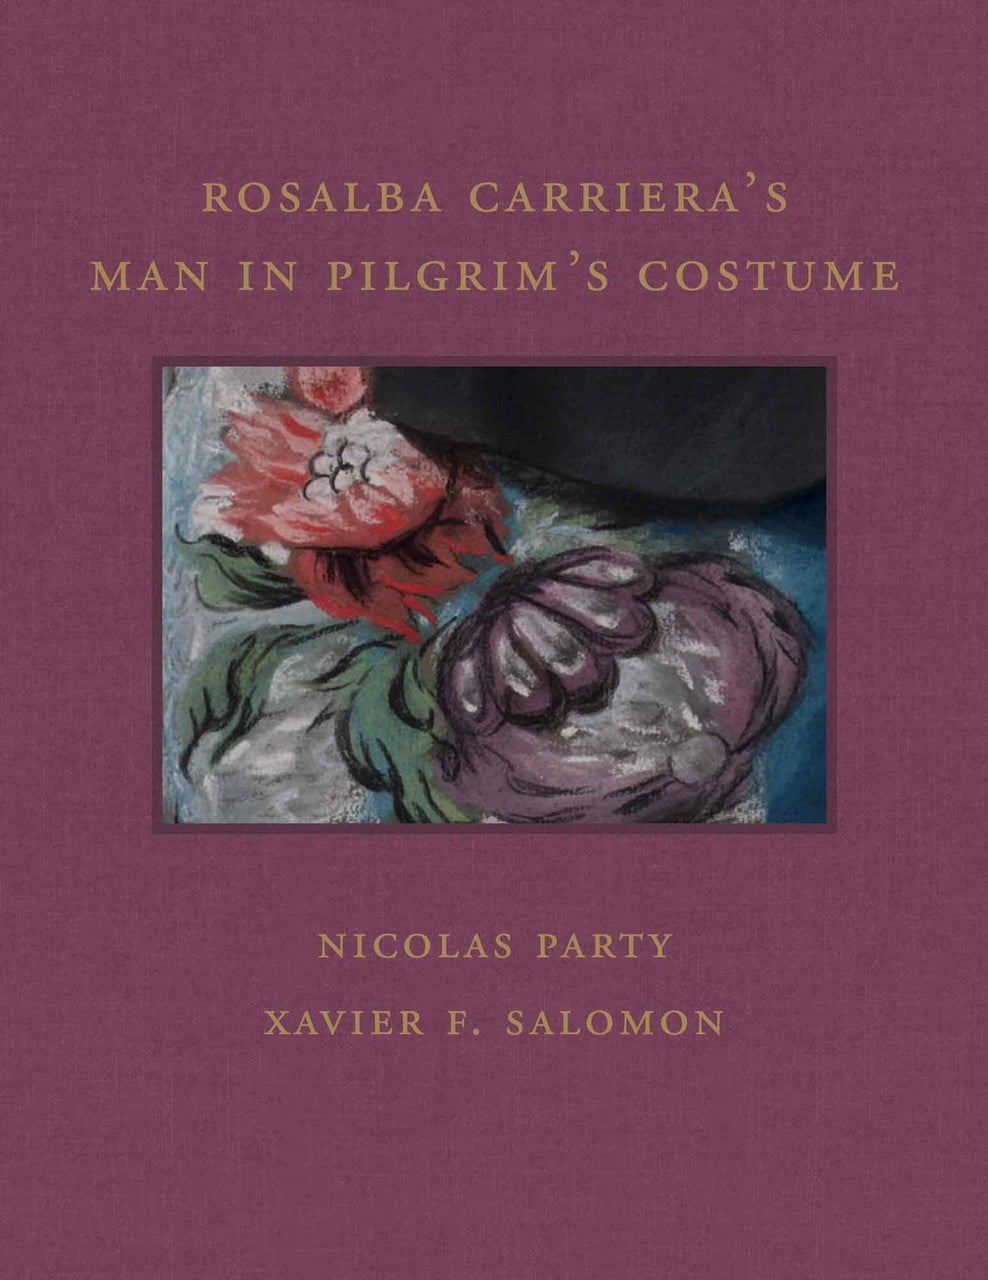 ook cover showing detail of flower on clothing, entitled Rosalba Carriera's Man in Pilgrim's Costume